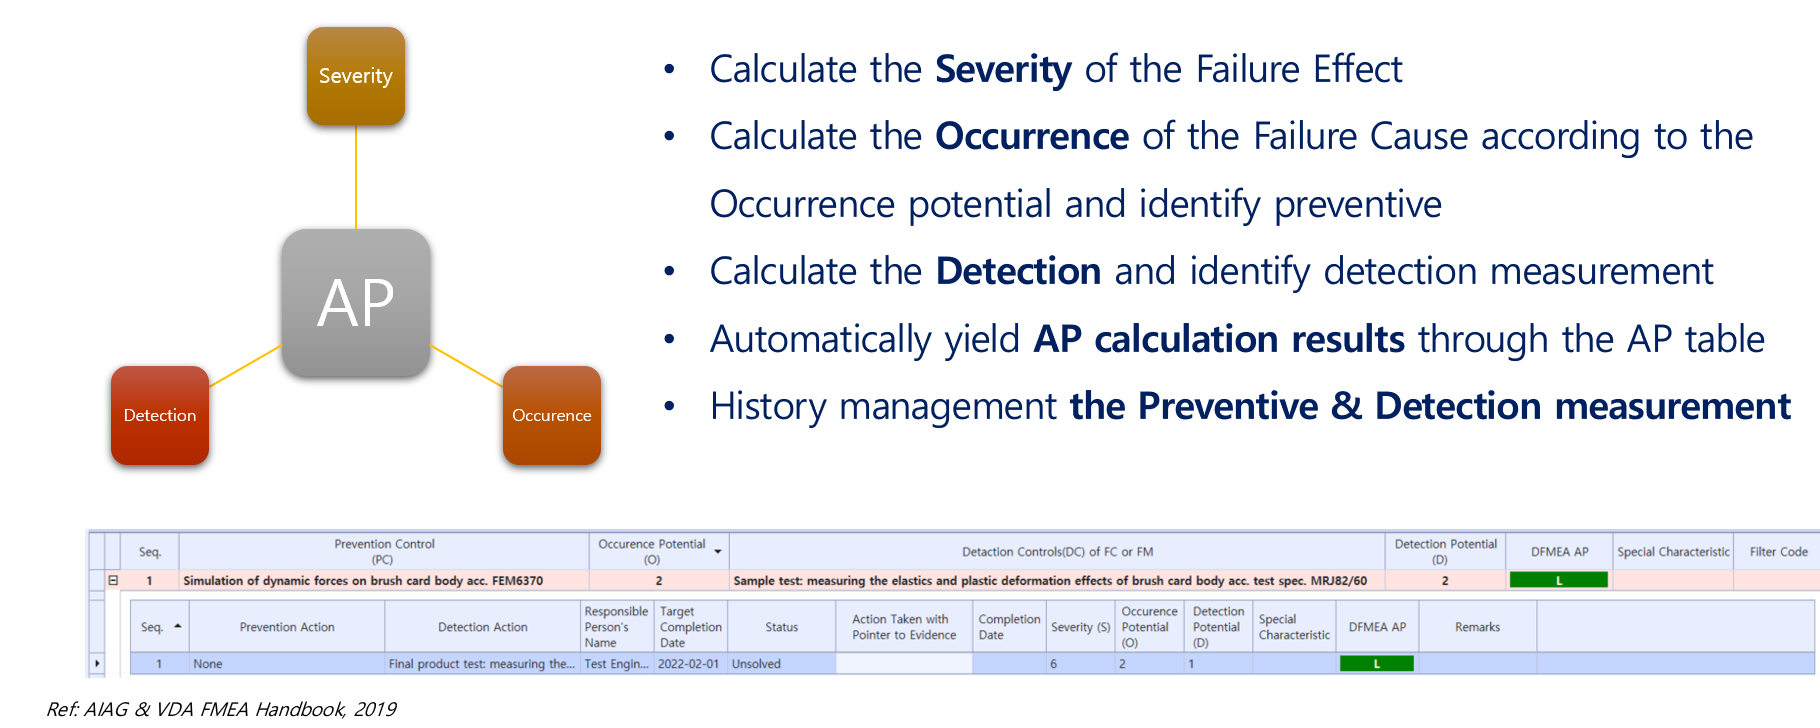 AP(Action Priority) Calculation